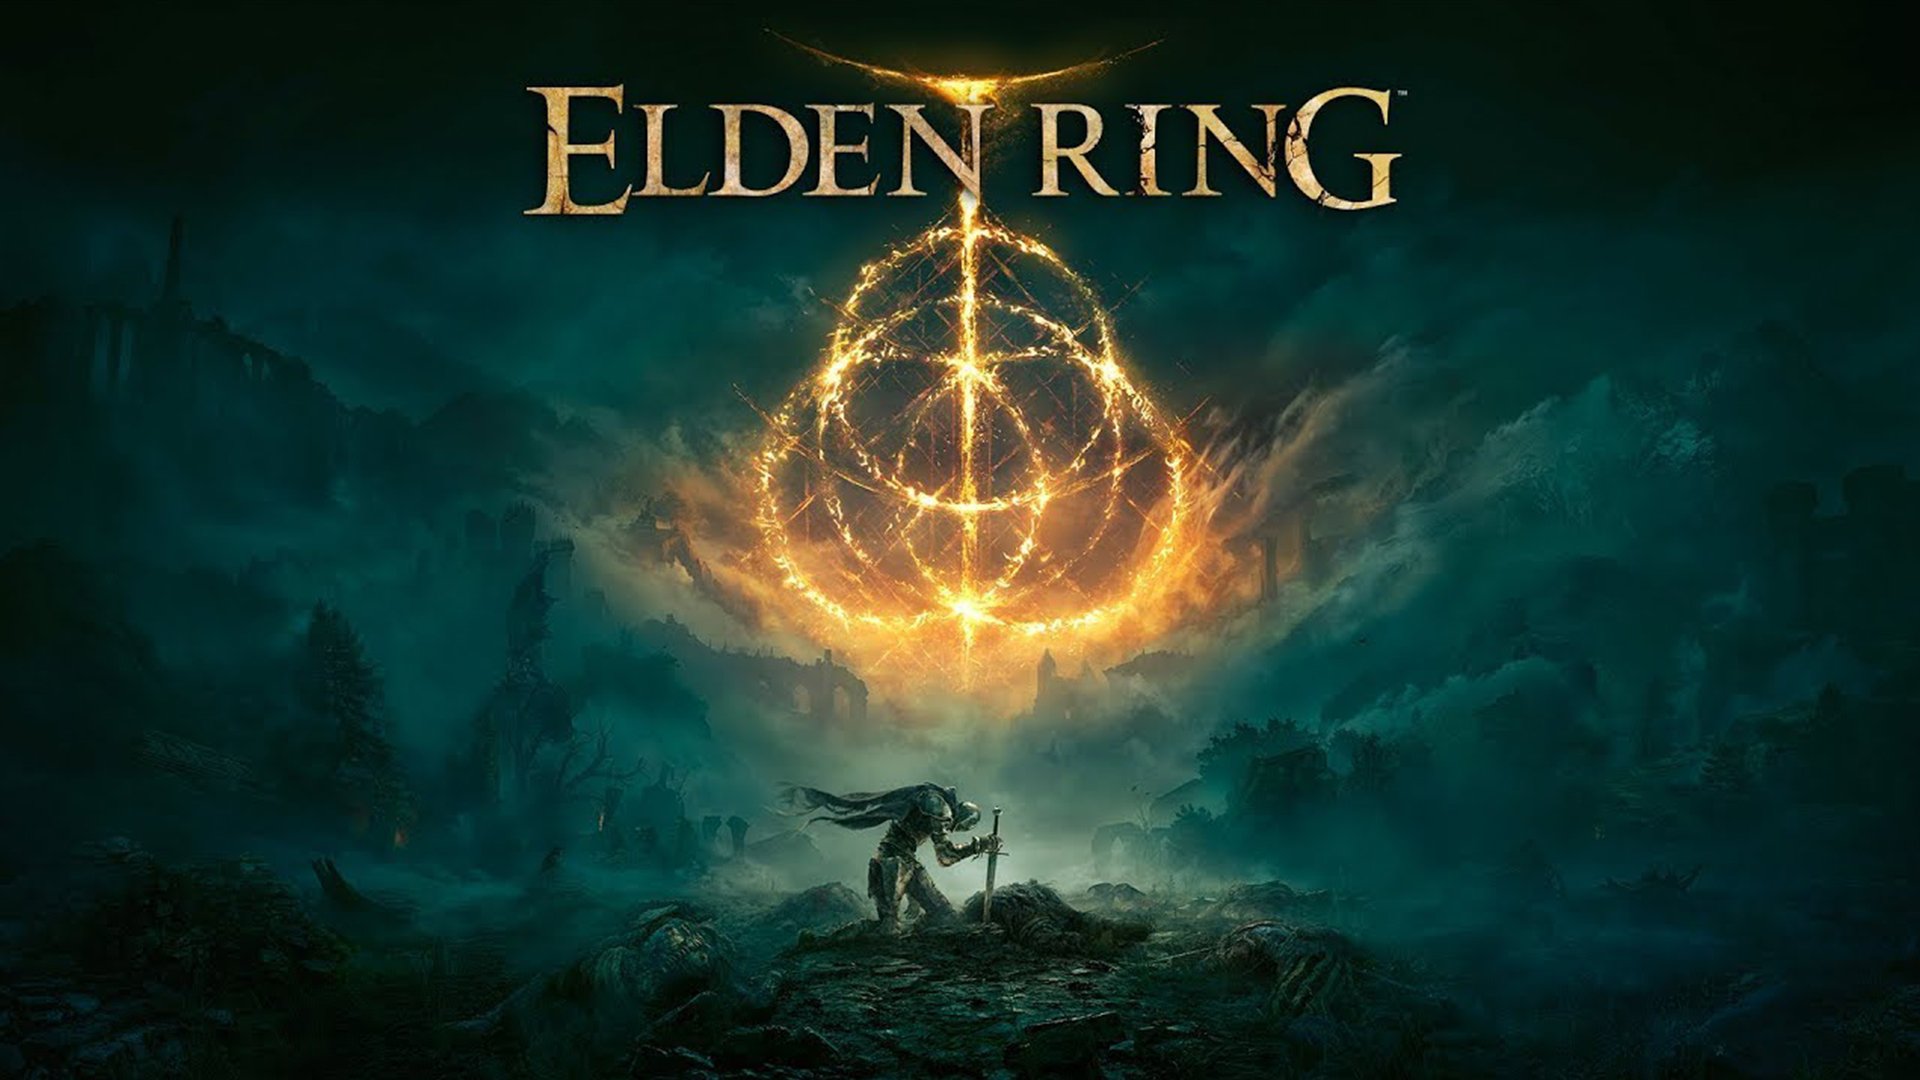 The developers showed 15 minutes of Elden Ring gameplay, pre-order of the game also started